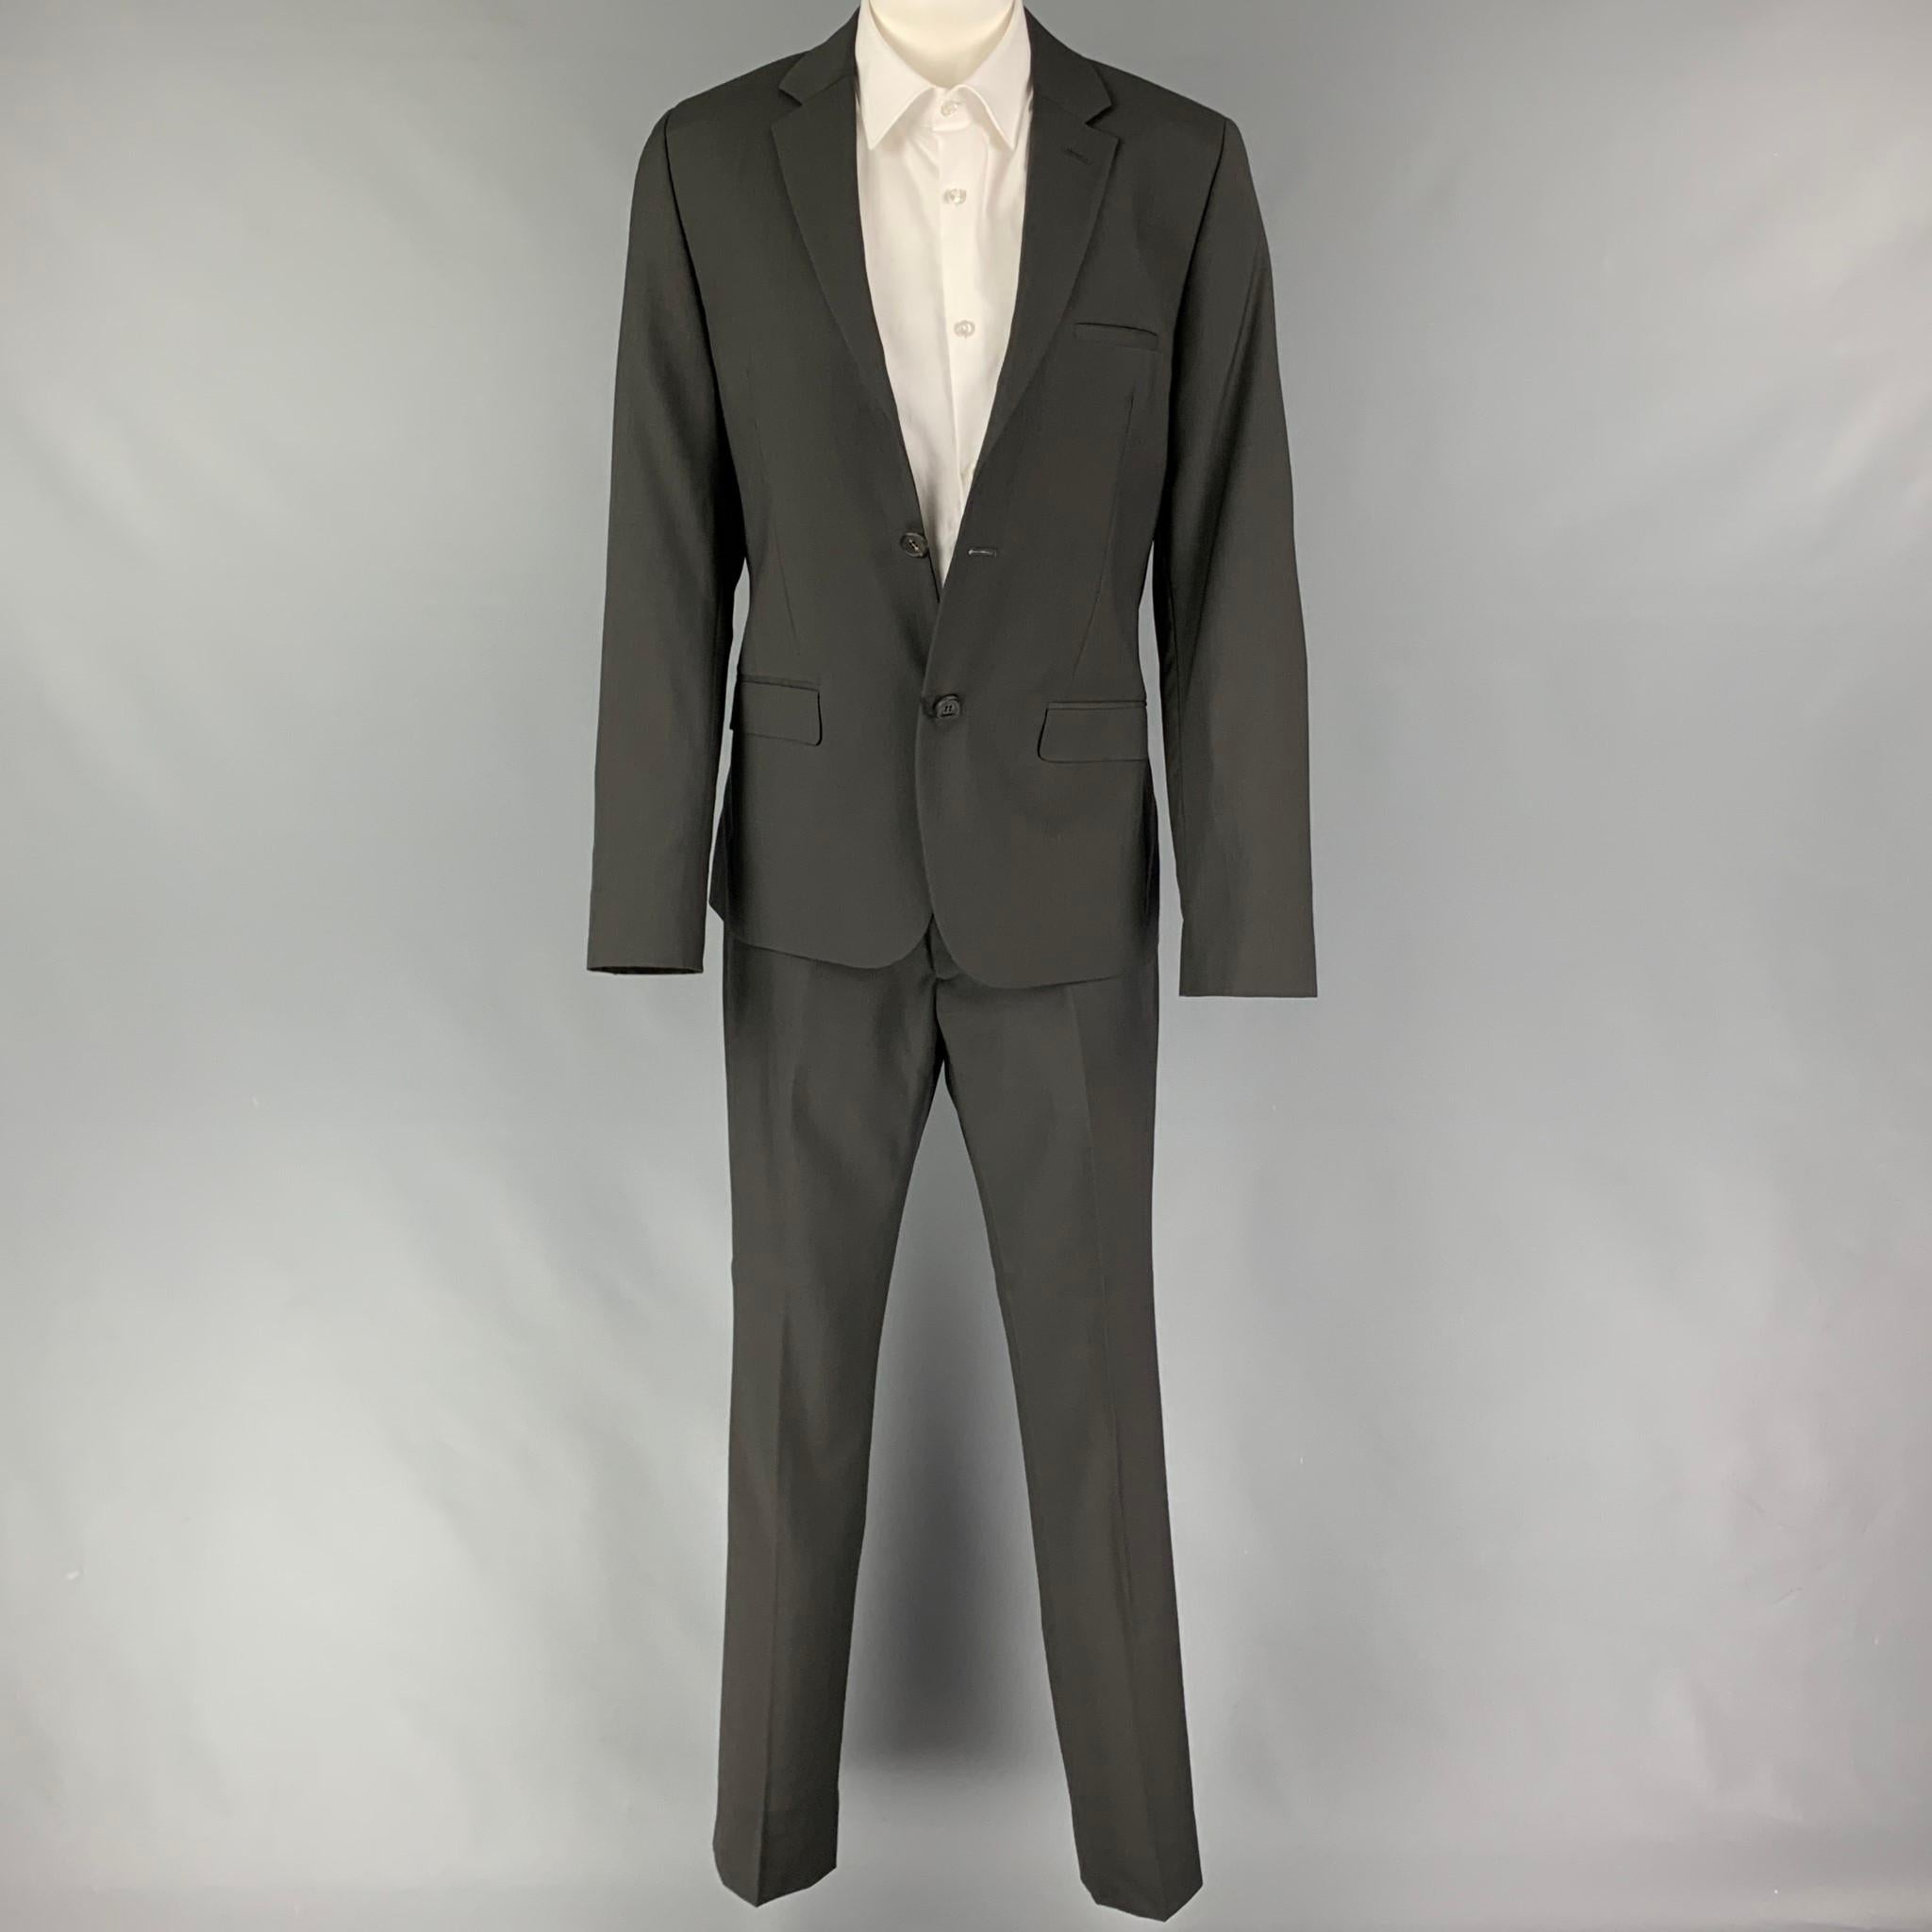 CALVIN KLEIN COLLECTION suit comes in a charcoal wool  with a full liner and includes a single breasted,  double button sport coat with a notch lapel and matching flat front trousers.

New With Tags.
Marked: 46/36
Original Retail Price: